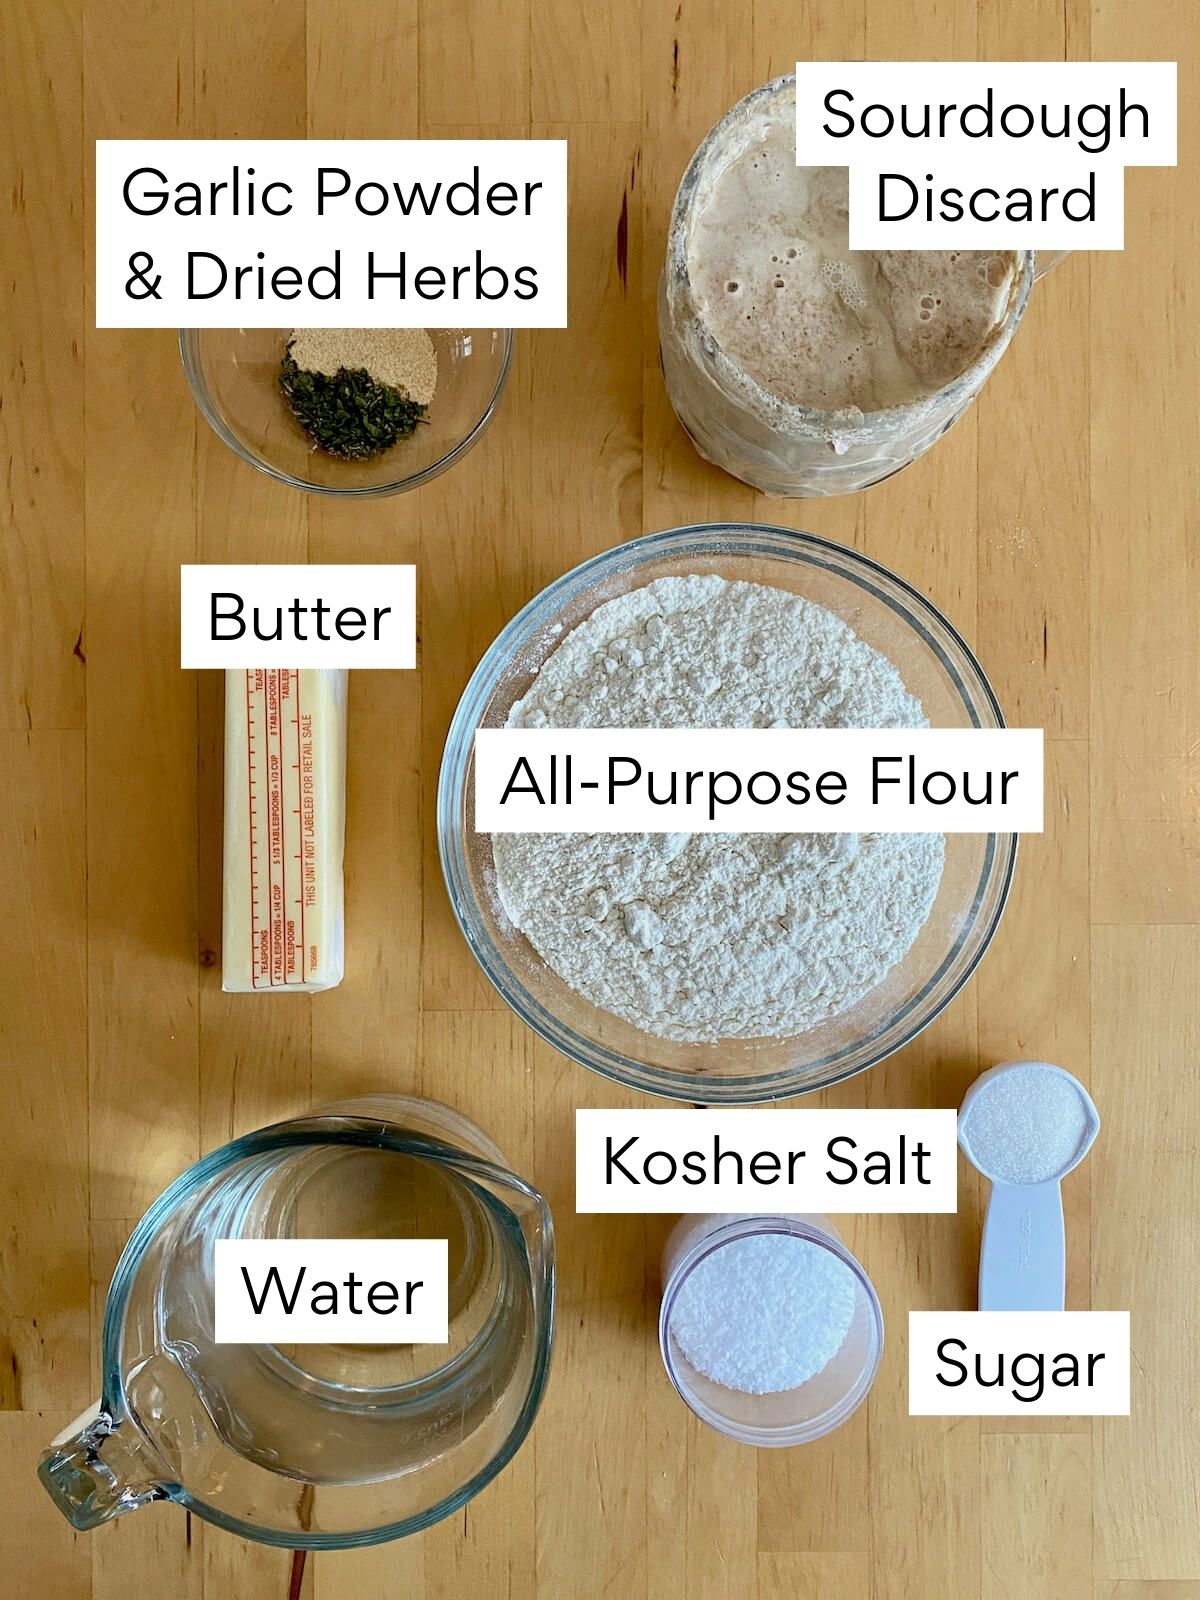 The ingredients to make sourdough garlic knots. Each ingredient is labeled with text. They include garlic powder and dried herbs, sourdough discard, butter, all-purpose flour, water, kosher salt, and sugar.